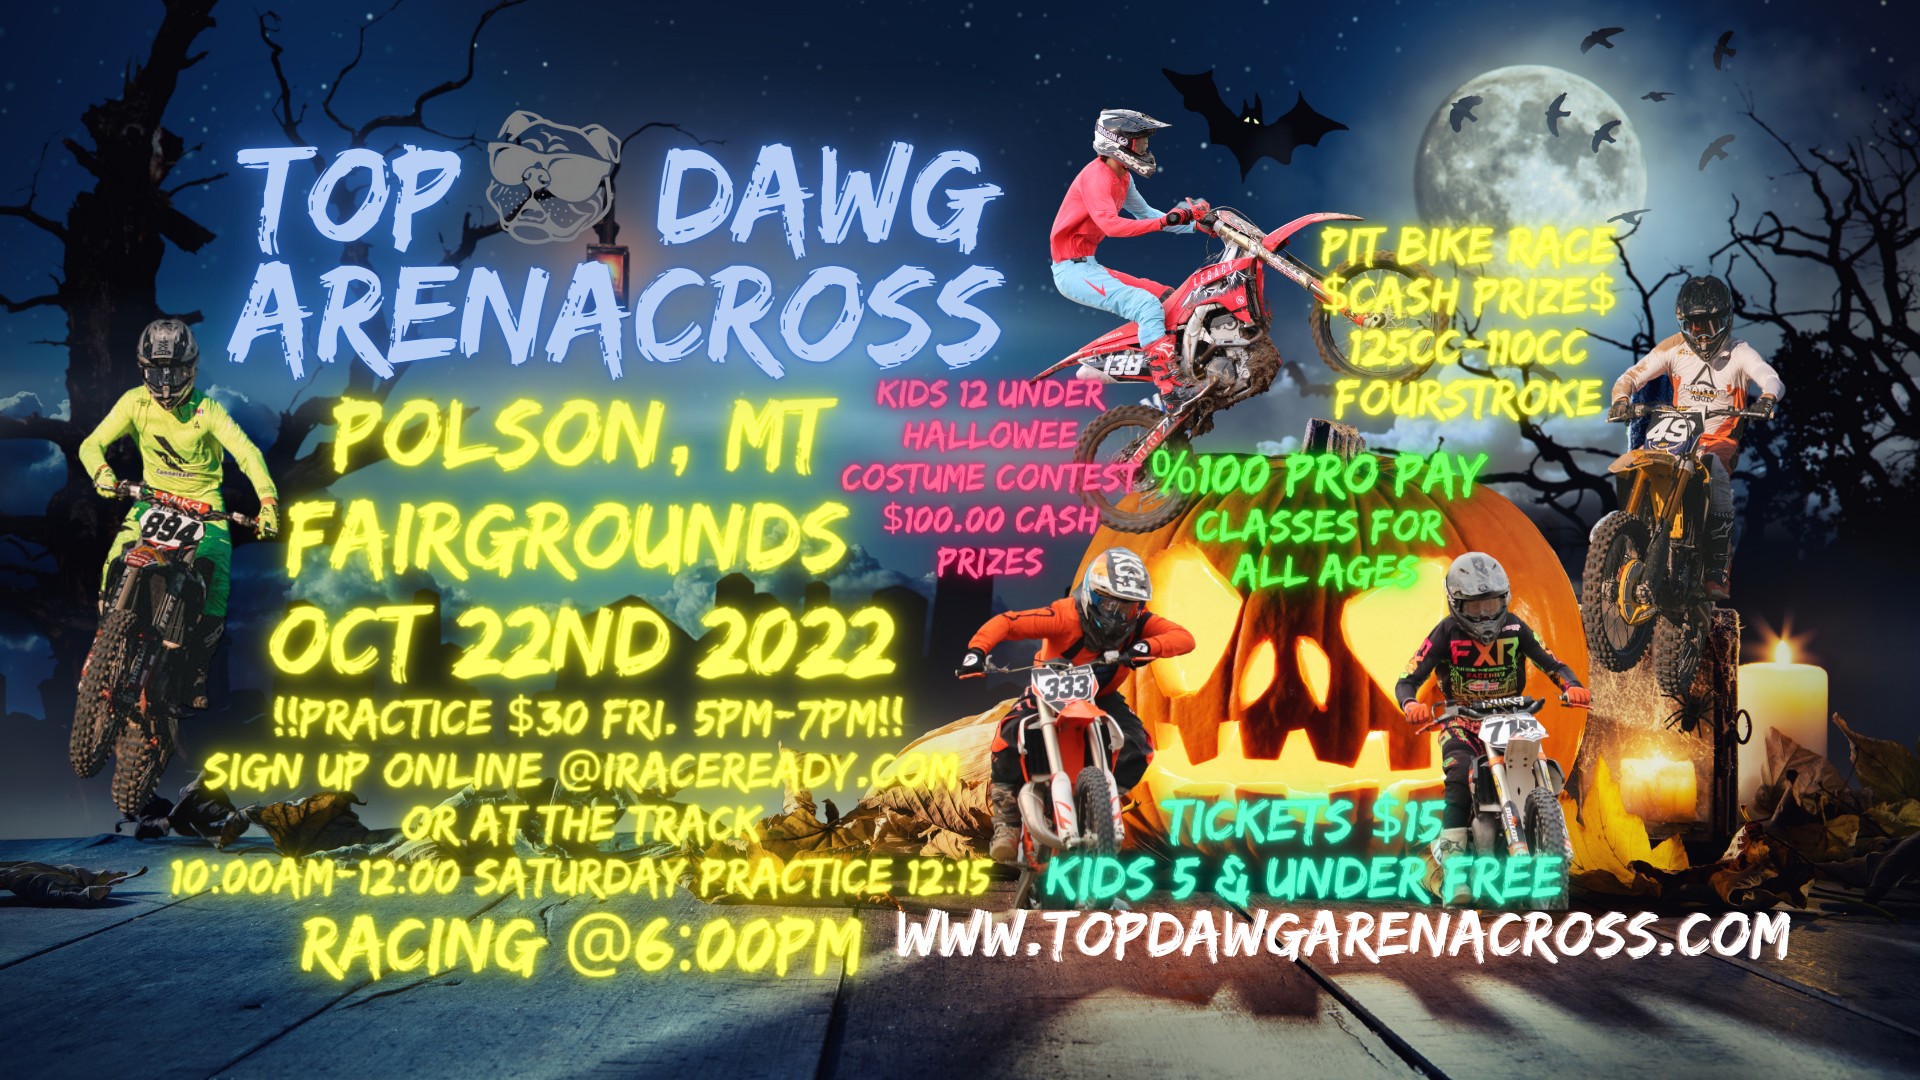 Top Dawg Arenacross at Polson Fairgrounds on Saturday, October 22, 2022